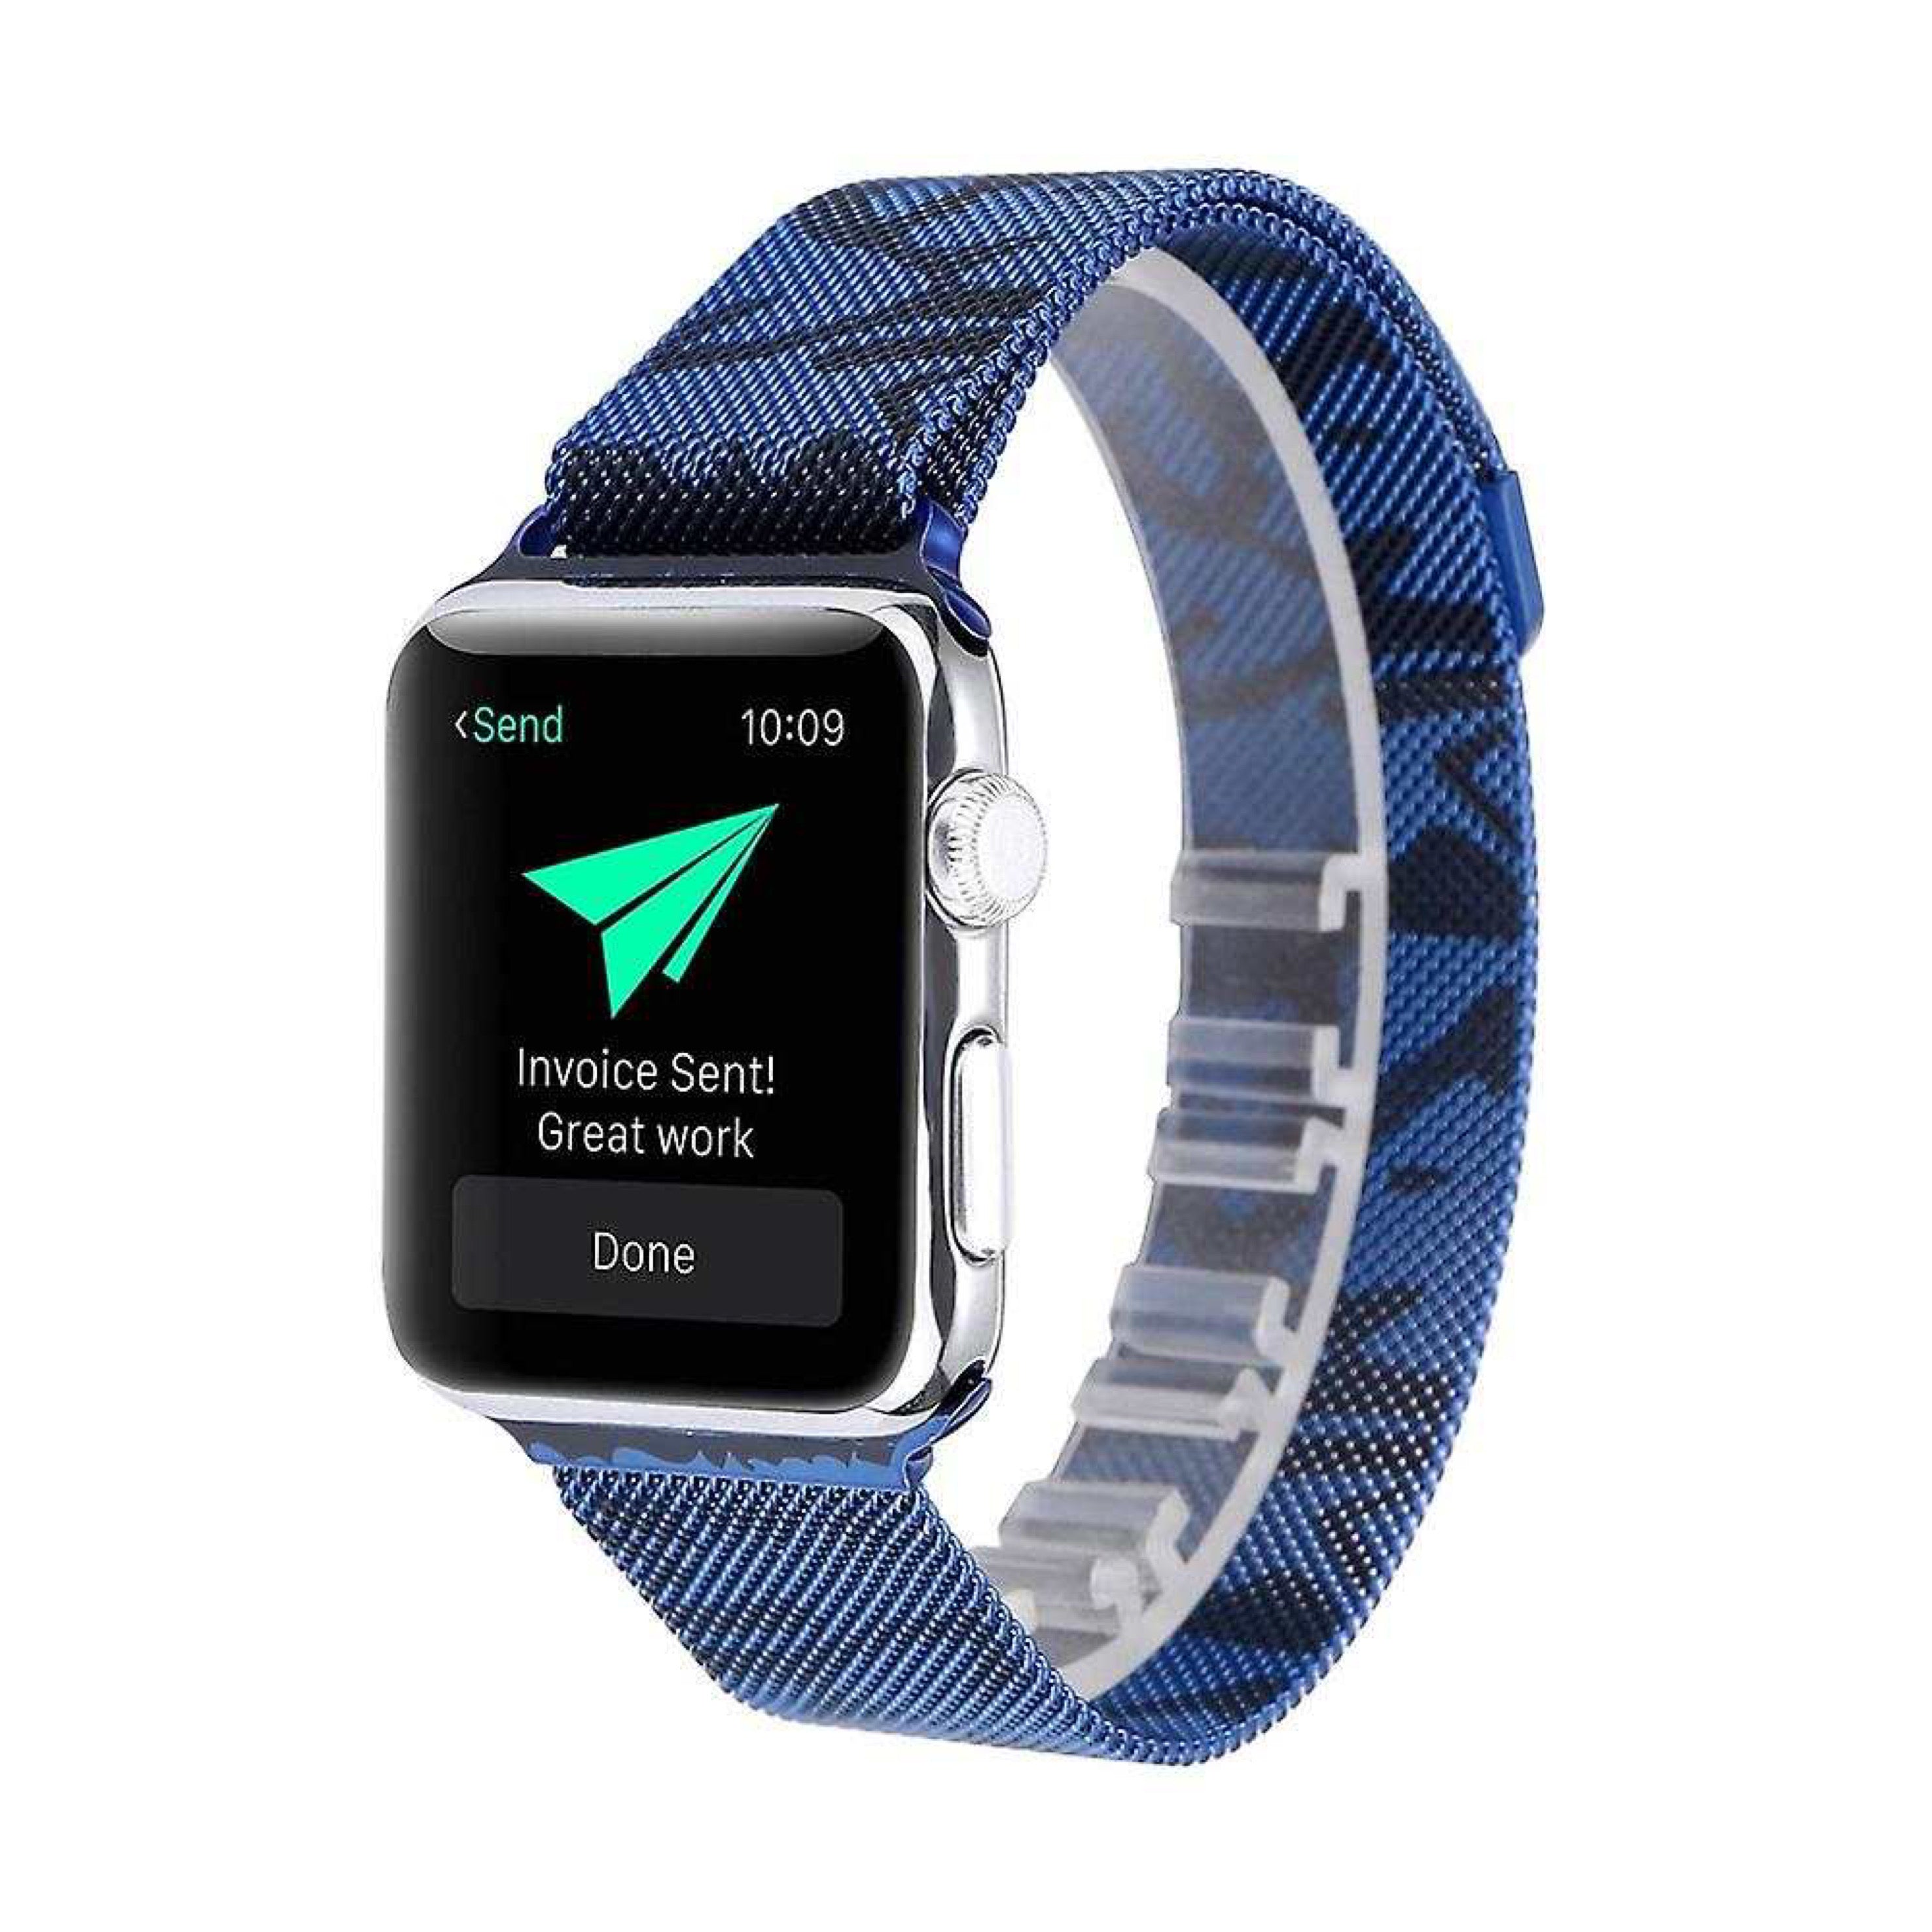 Milanese Loop Band For Apple Watch Multiple Prints Available